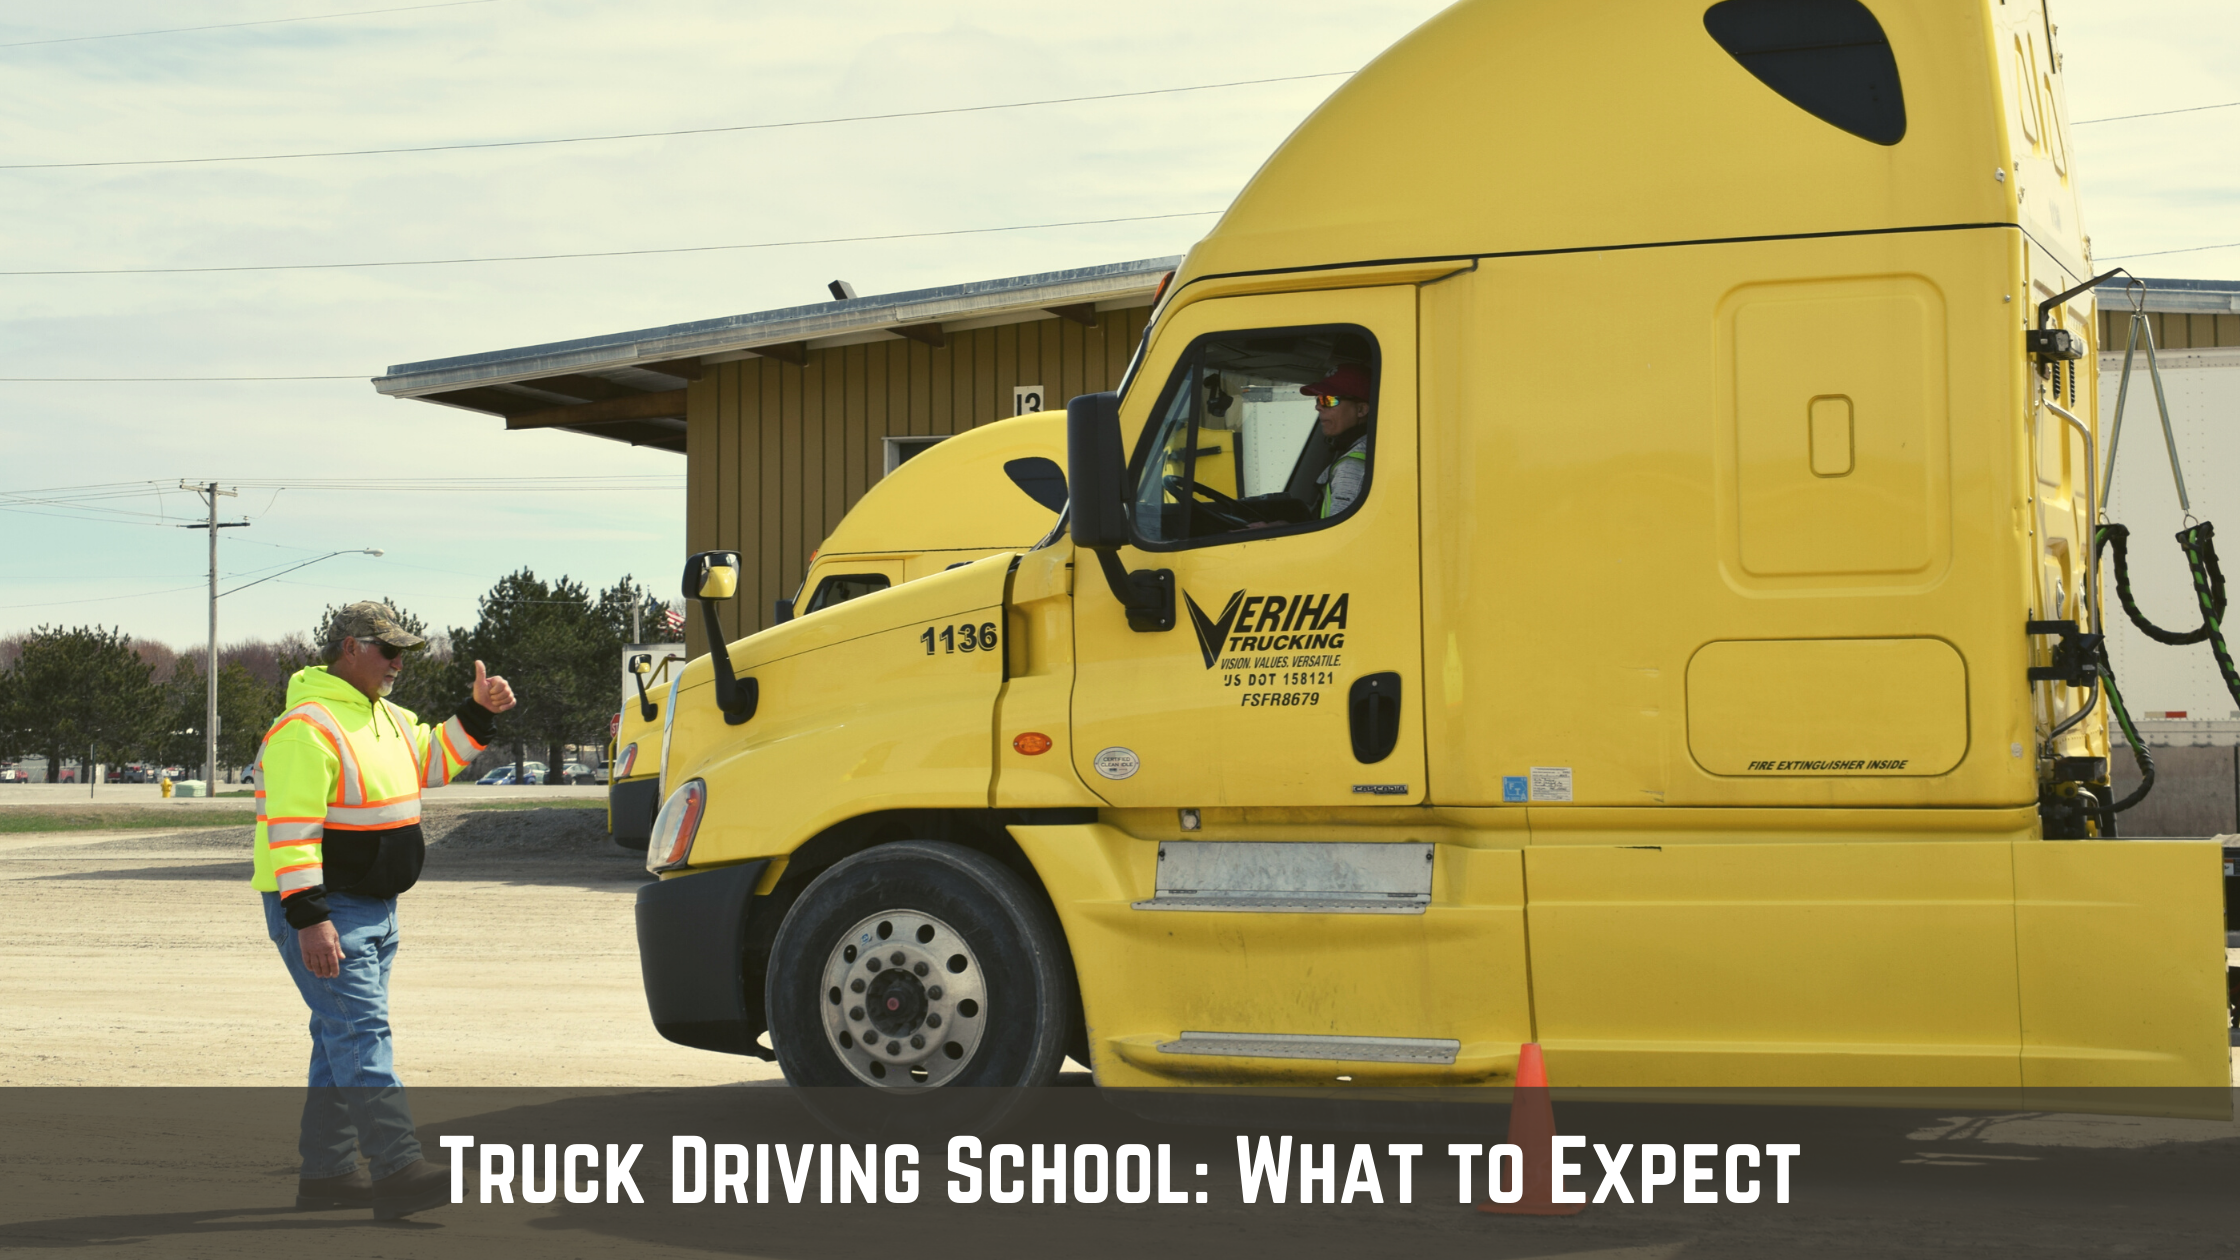 Truck Driving School: What to Expect